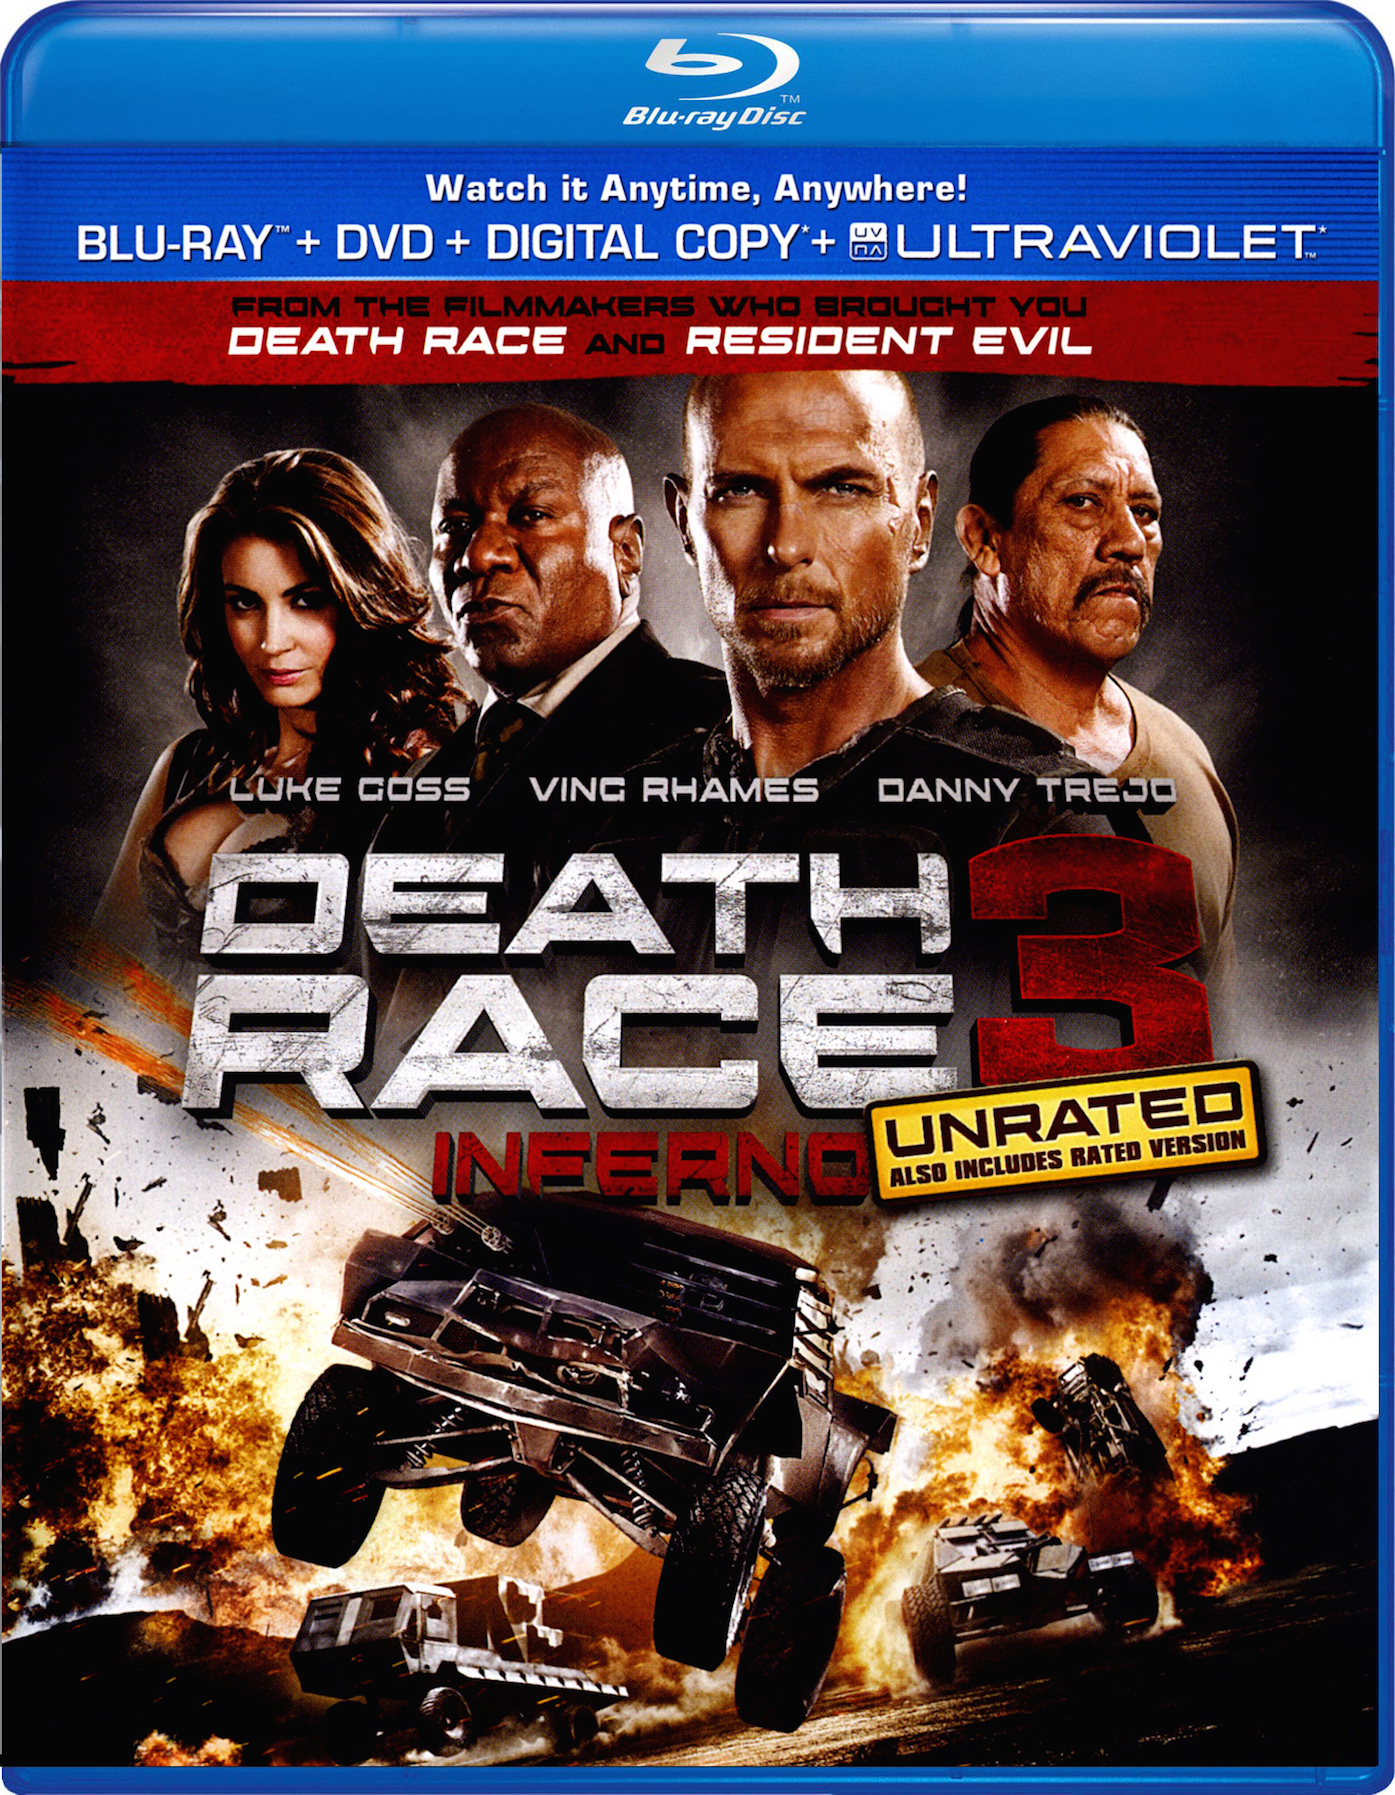 Death Race 3: Inferno (Unrated) [2013] Carrera Mortal 3: Infierno (Unrated) [2013] [DTS 5.1 + SUP] [Blu Ray-Rip]  54667_front